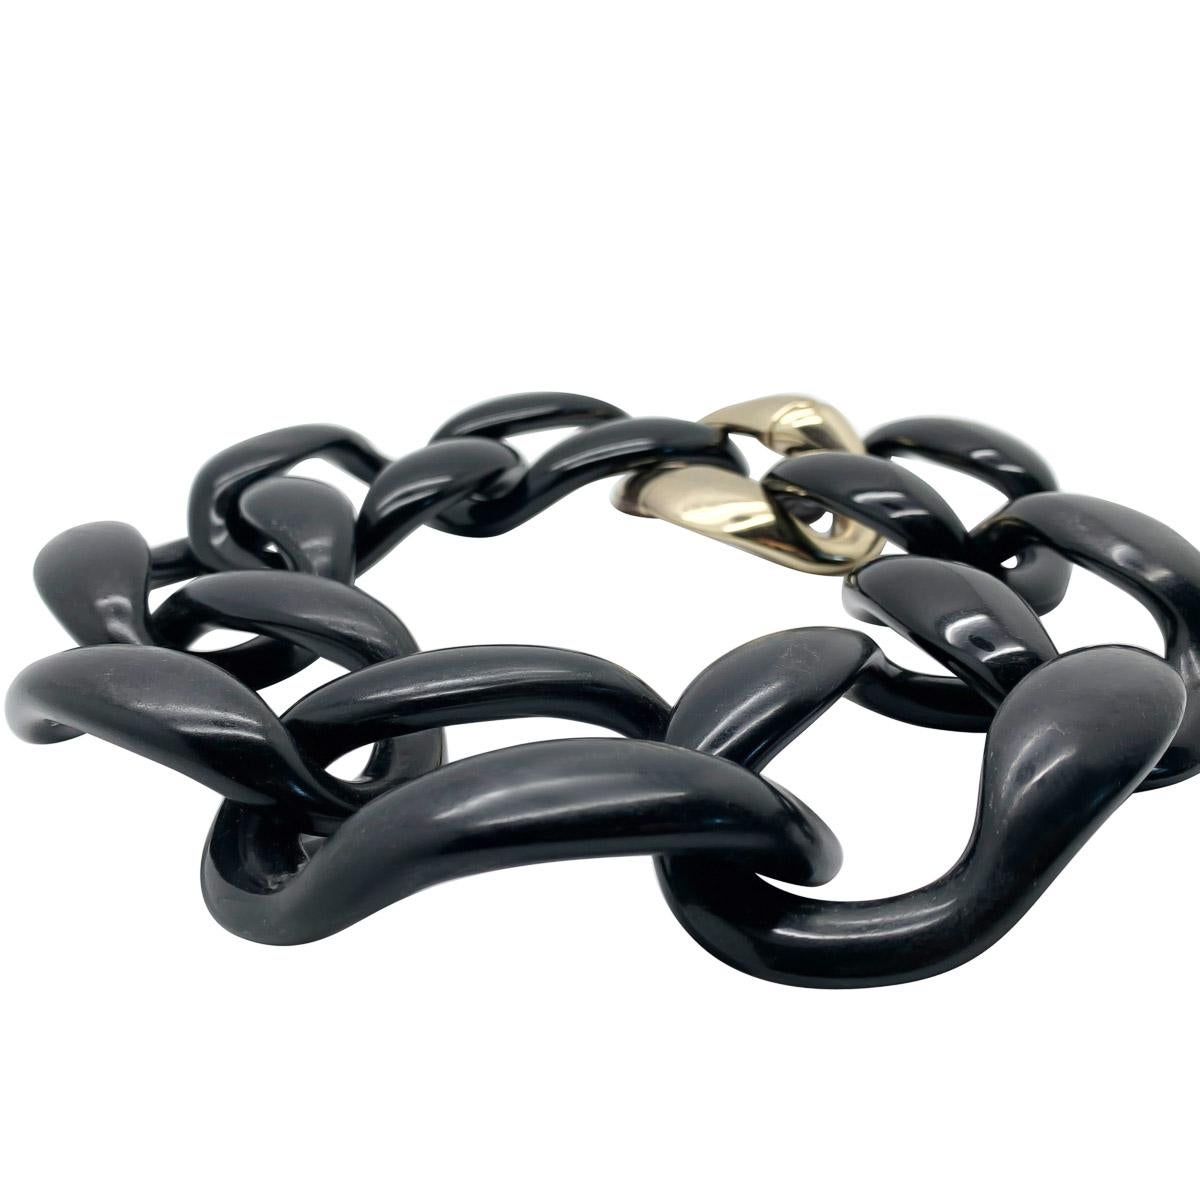 An oversize Chunky Black Curb Necklace. Of gigantic proportions this one will do all the talking. Outrageous yet classic design.
An unsigned beauty. A rare treasure. Just because a jewel doesn’t carry a designer name, doesn’t mean it isn't coveted.